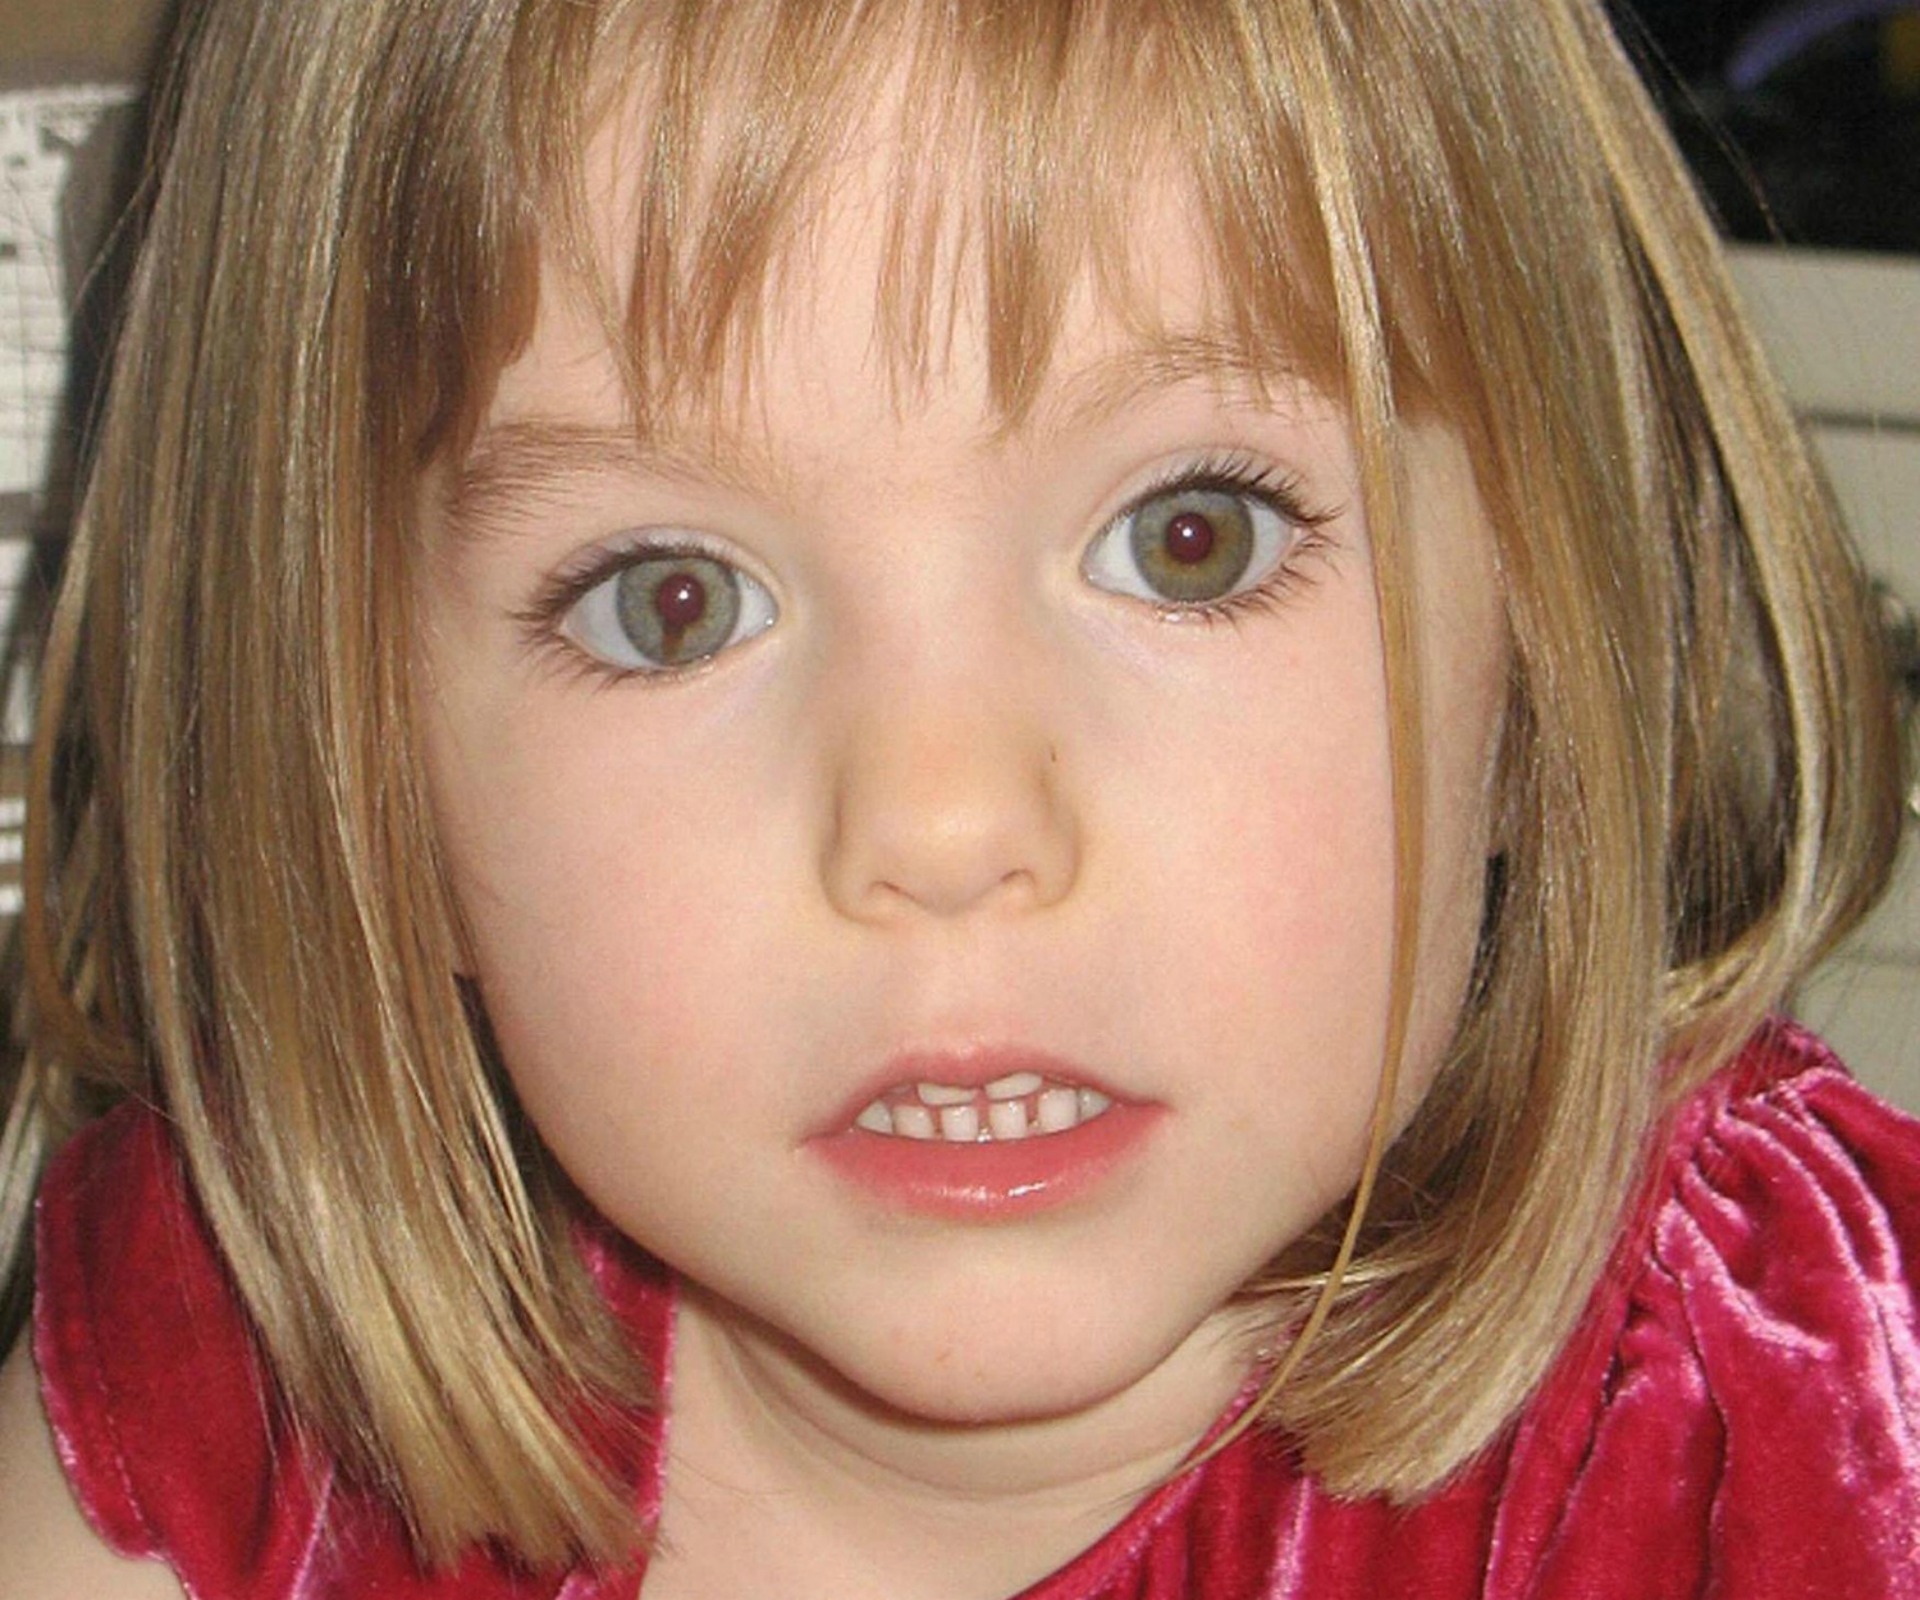 It’s over: Hunt for Madeleine McCann wraps up